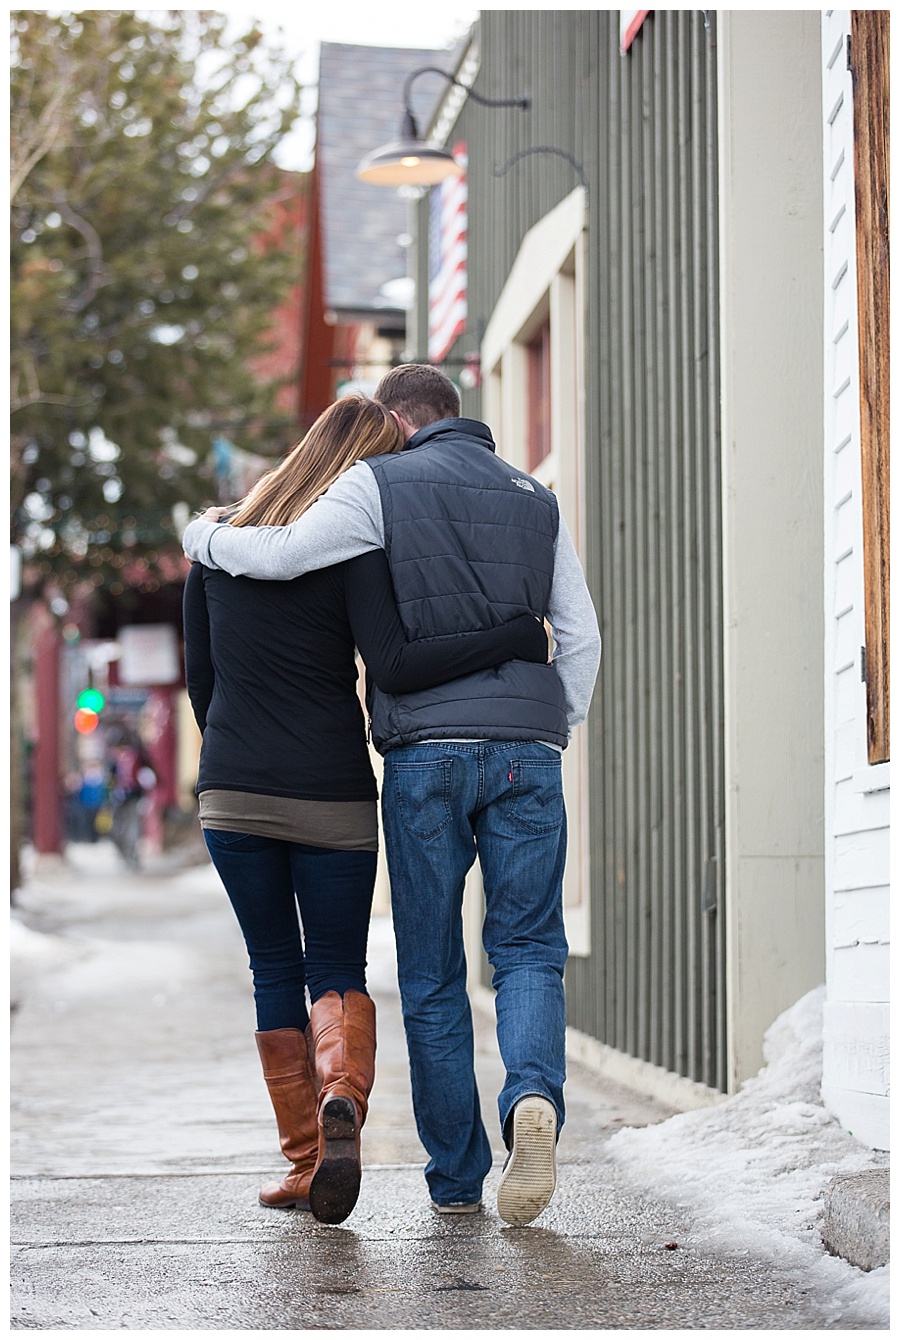 12 Cute engagement photos while walking